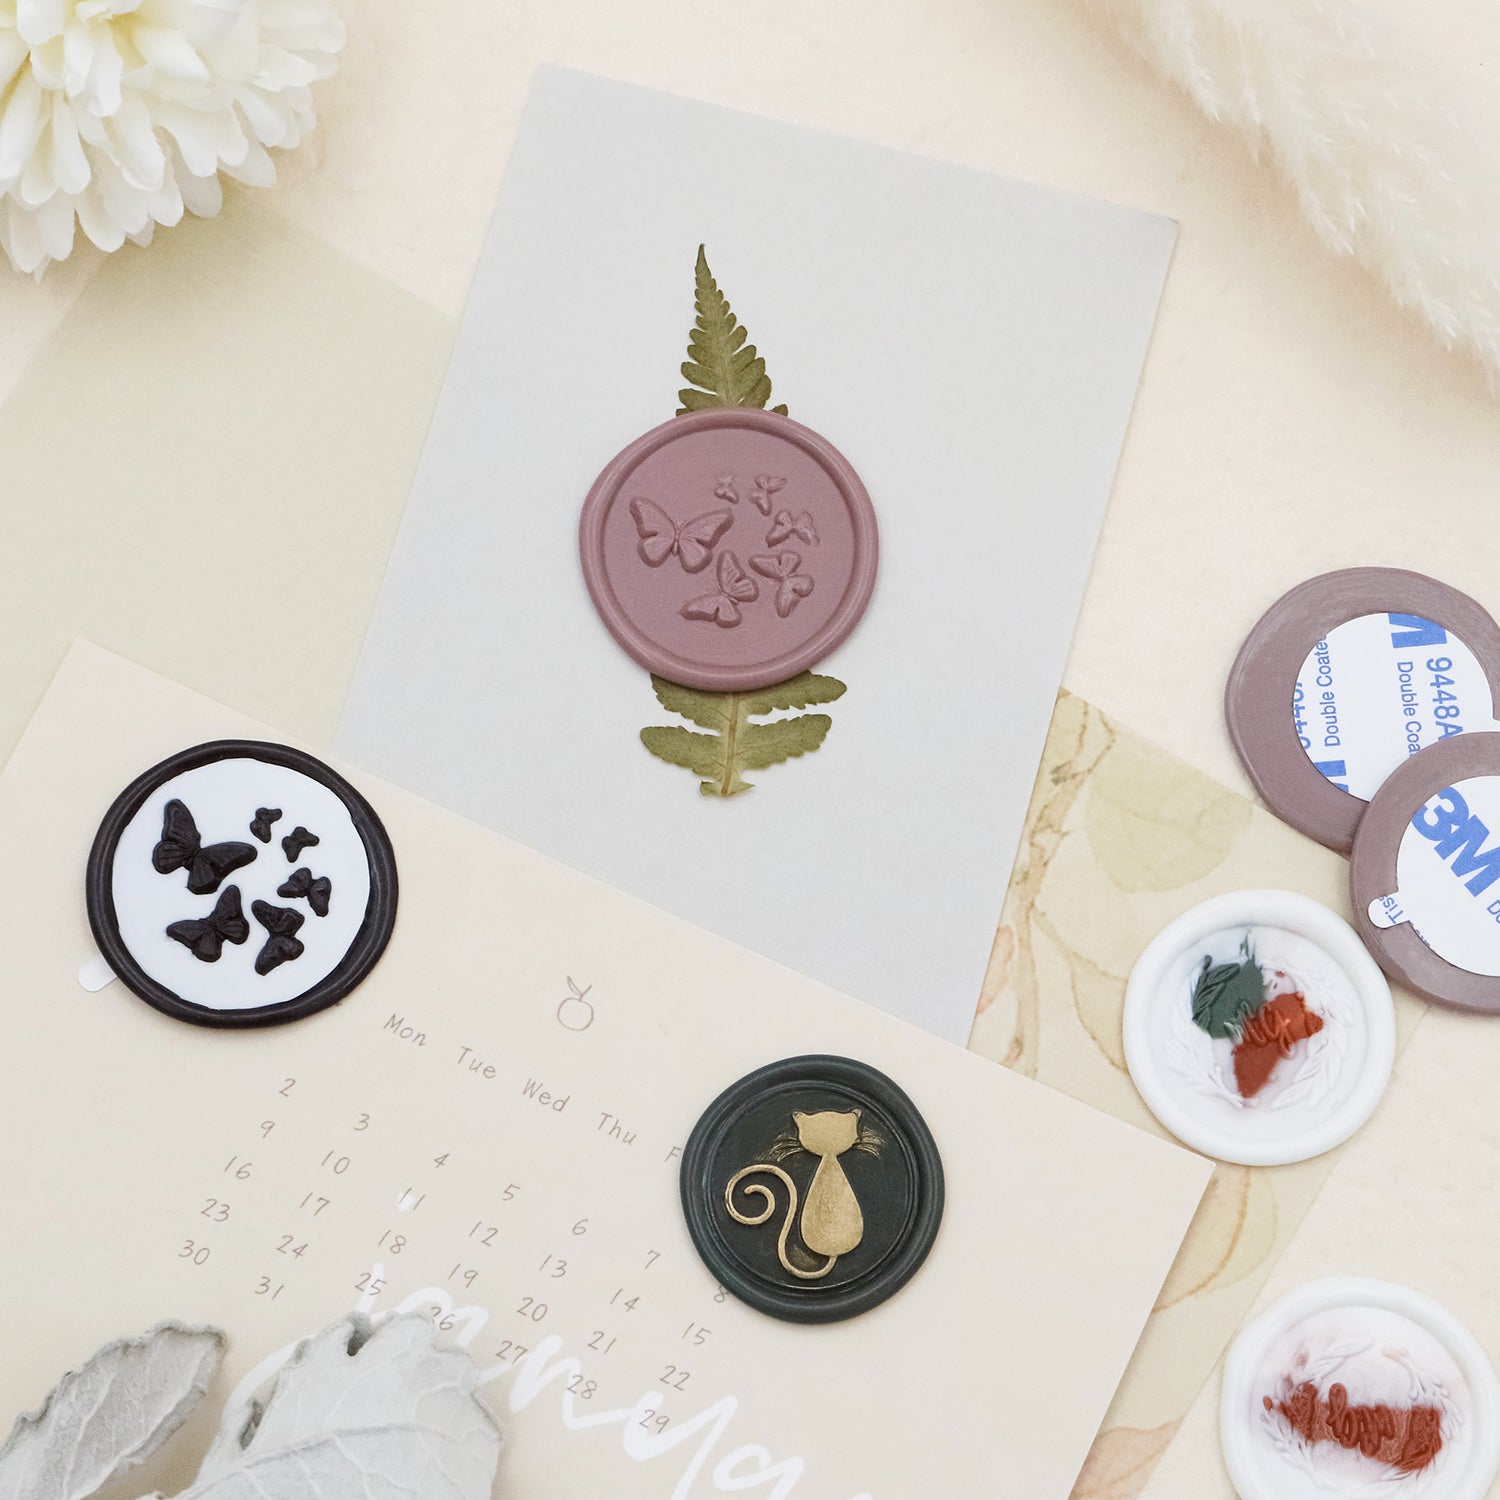 Fully Customized Self Adhesive Wax Seal Stickers with Your Own Artwork